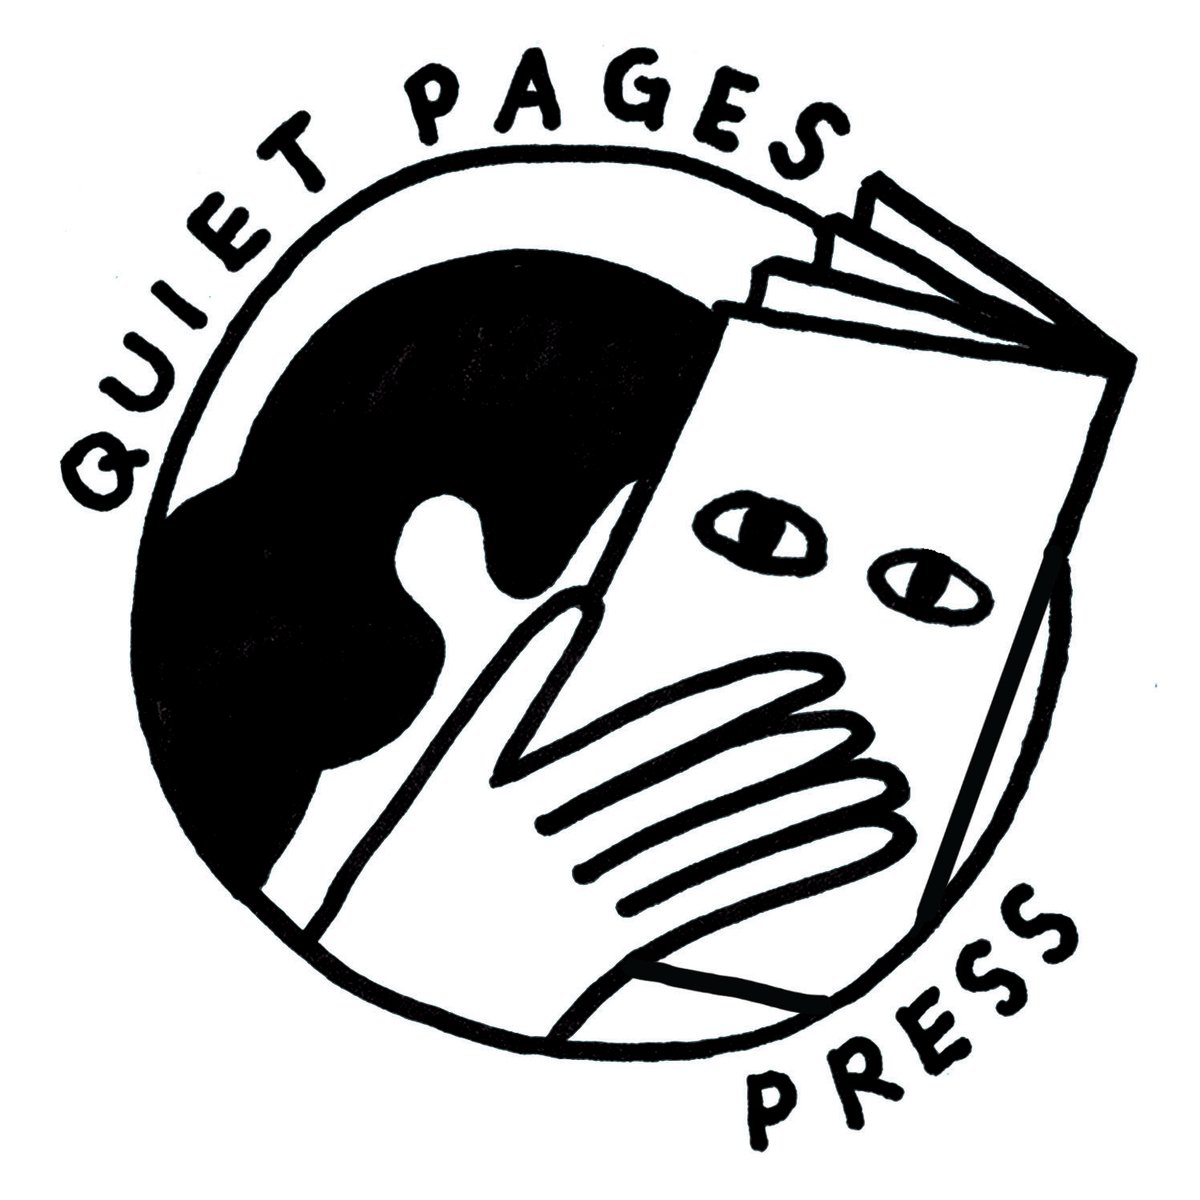 Press from be quiet!